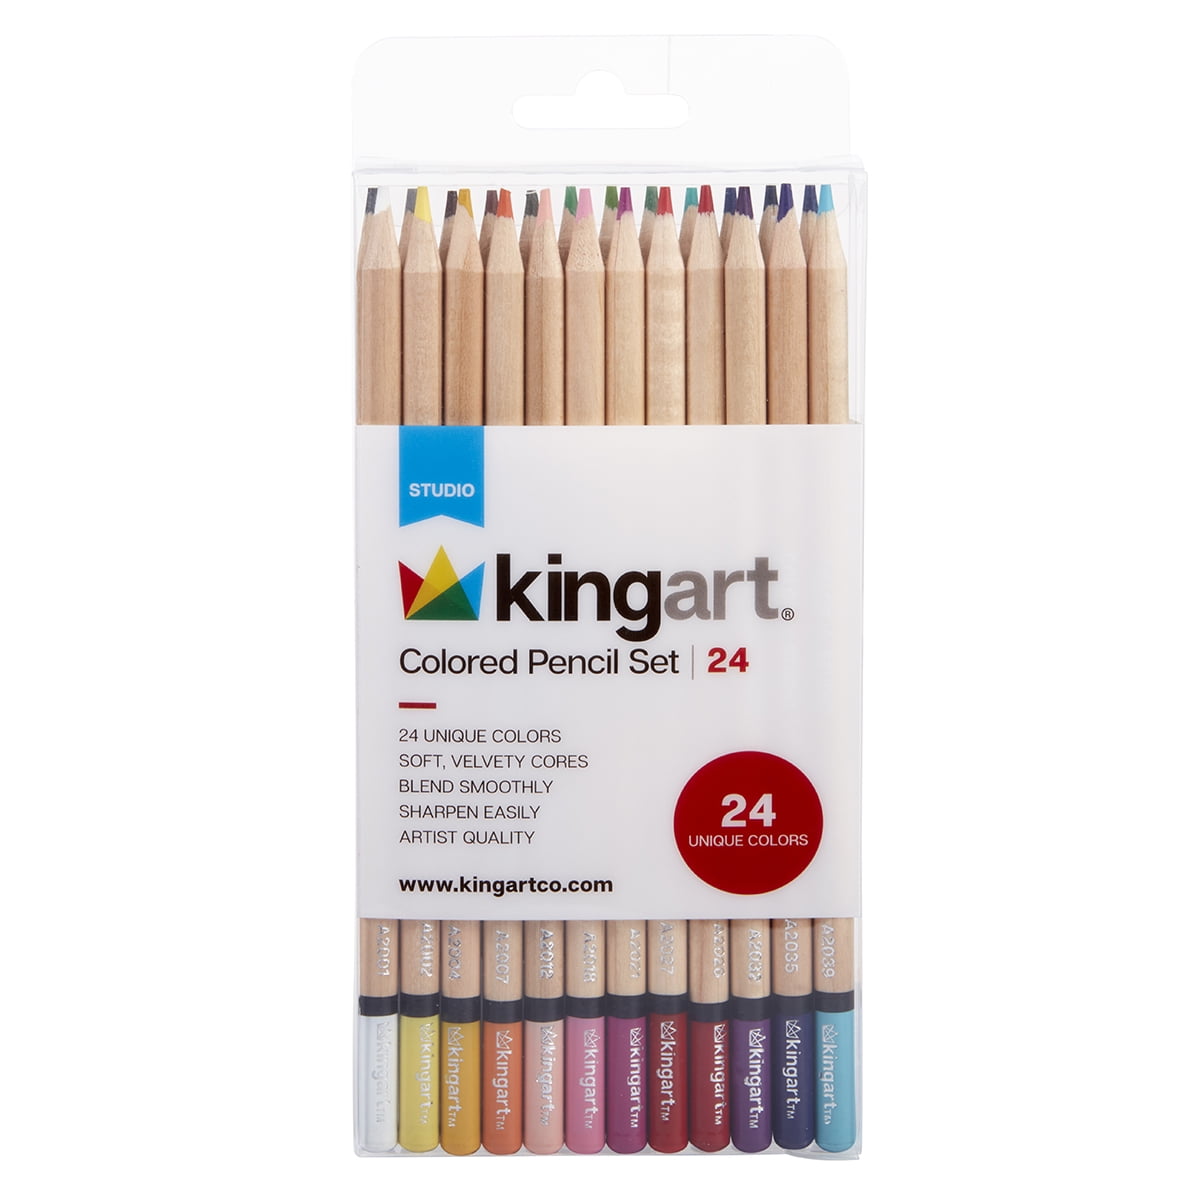 Castle Art Supplies 72 Colored Pencils Set for Coloring Books - New and  Improved Premium Artist Soft Series Lead with Vibrant